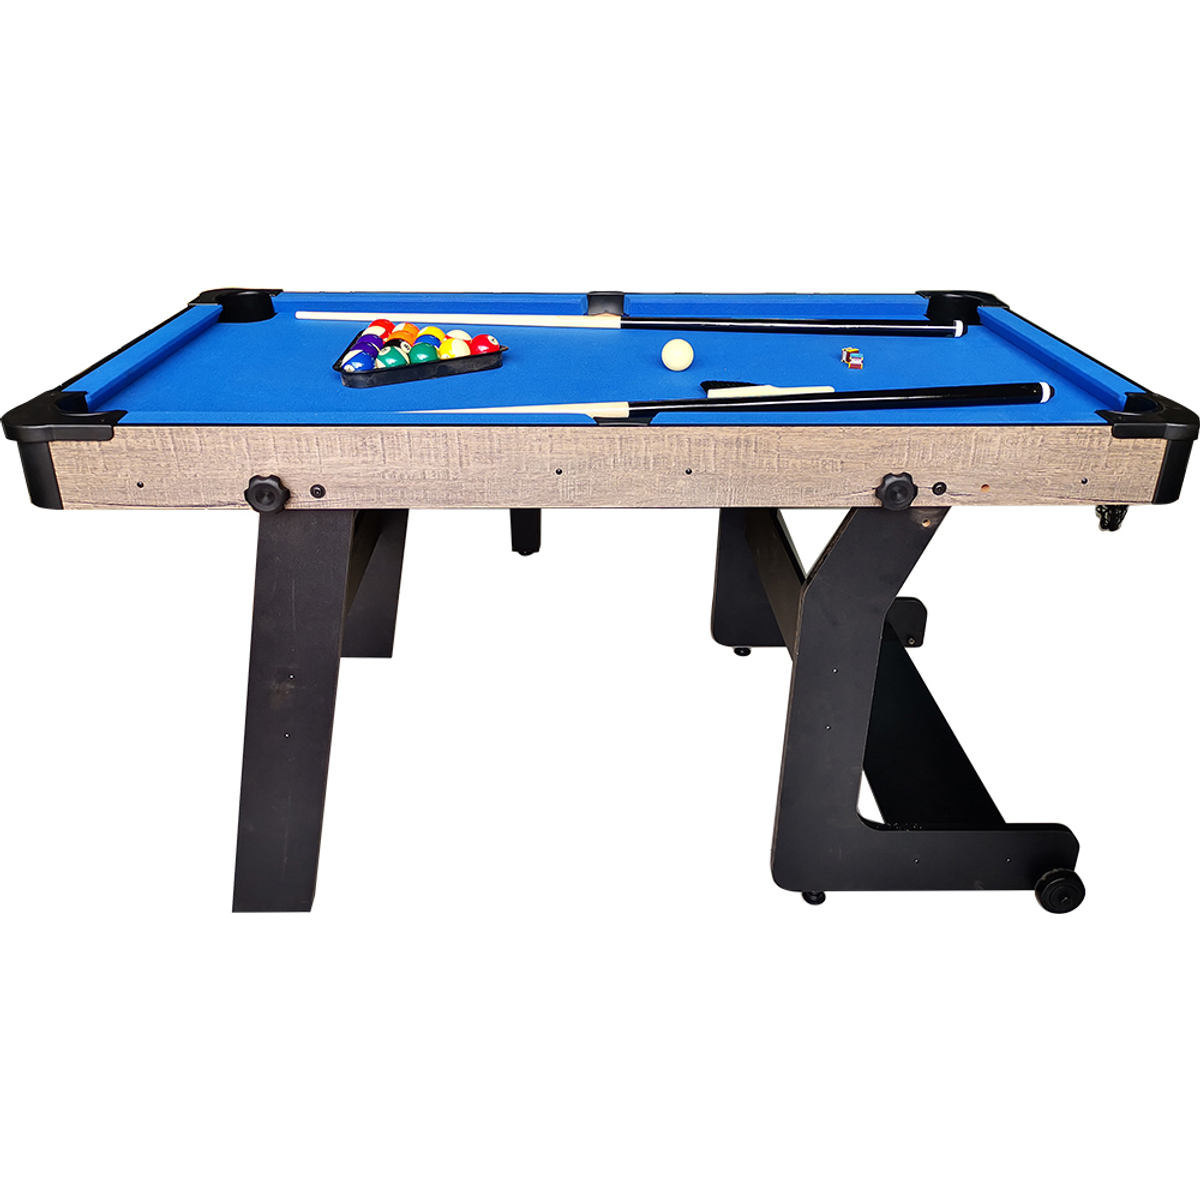 Top Table Pooltafel Fun Fold-Up Wood 5FT